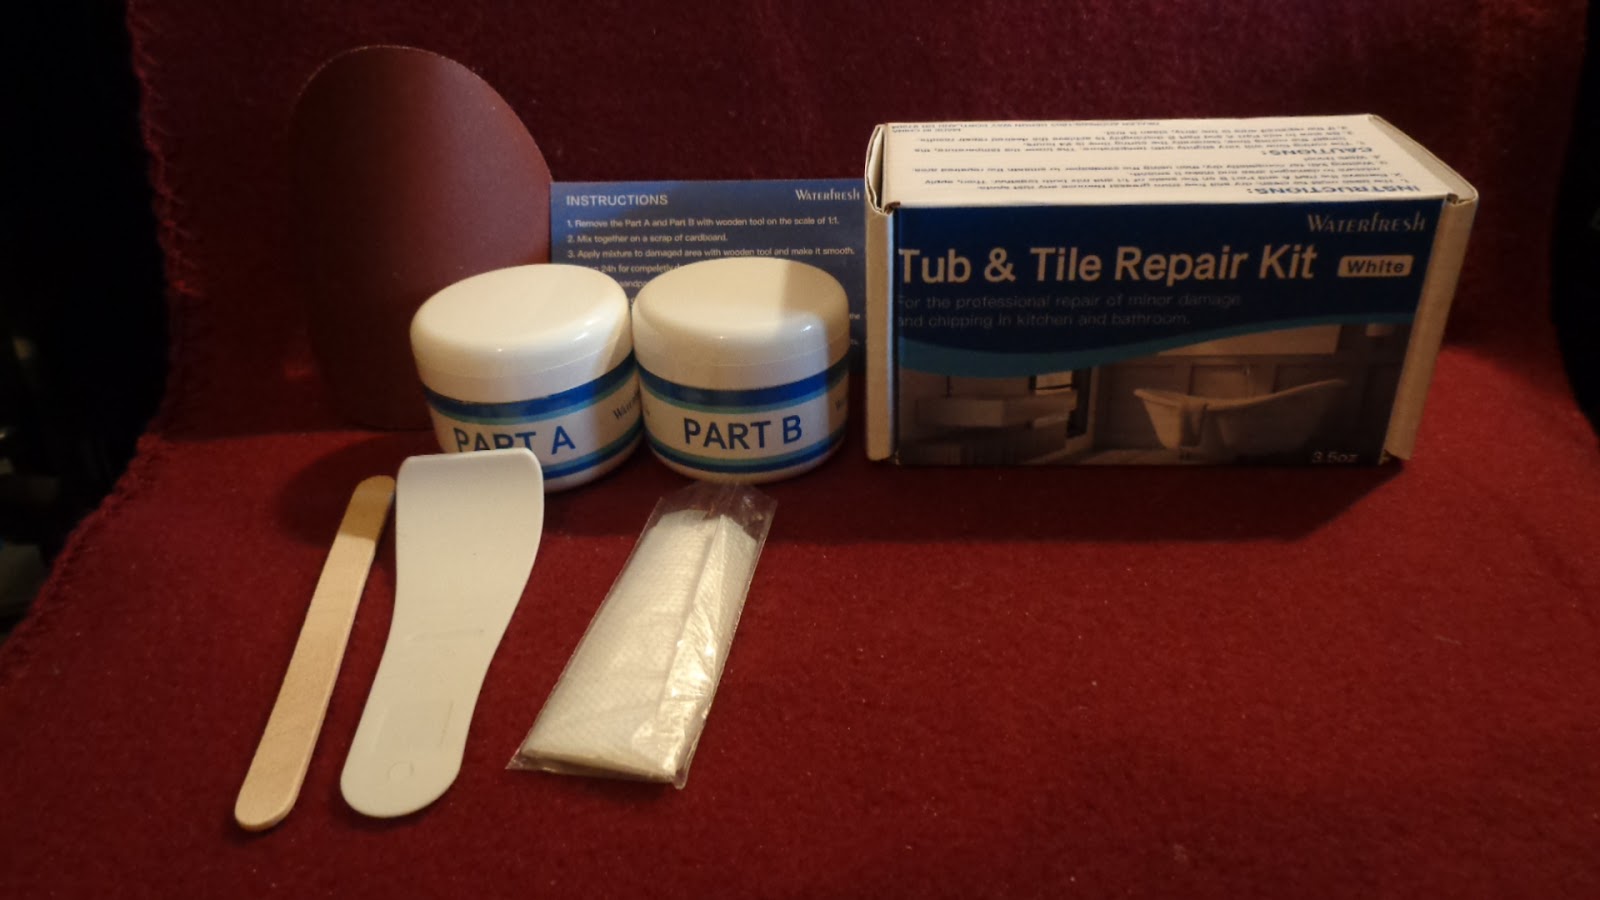 Lefty's Product Review's: Tub, Tile and Shower Repair Kit